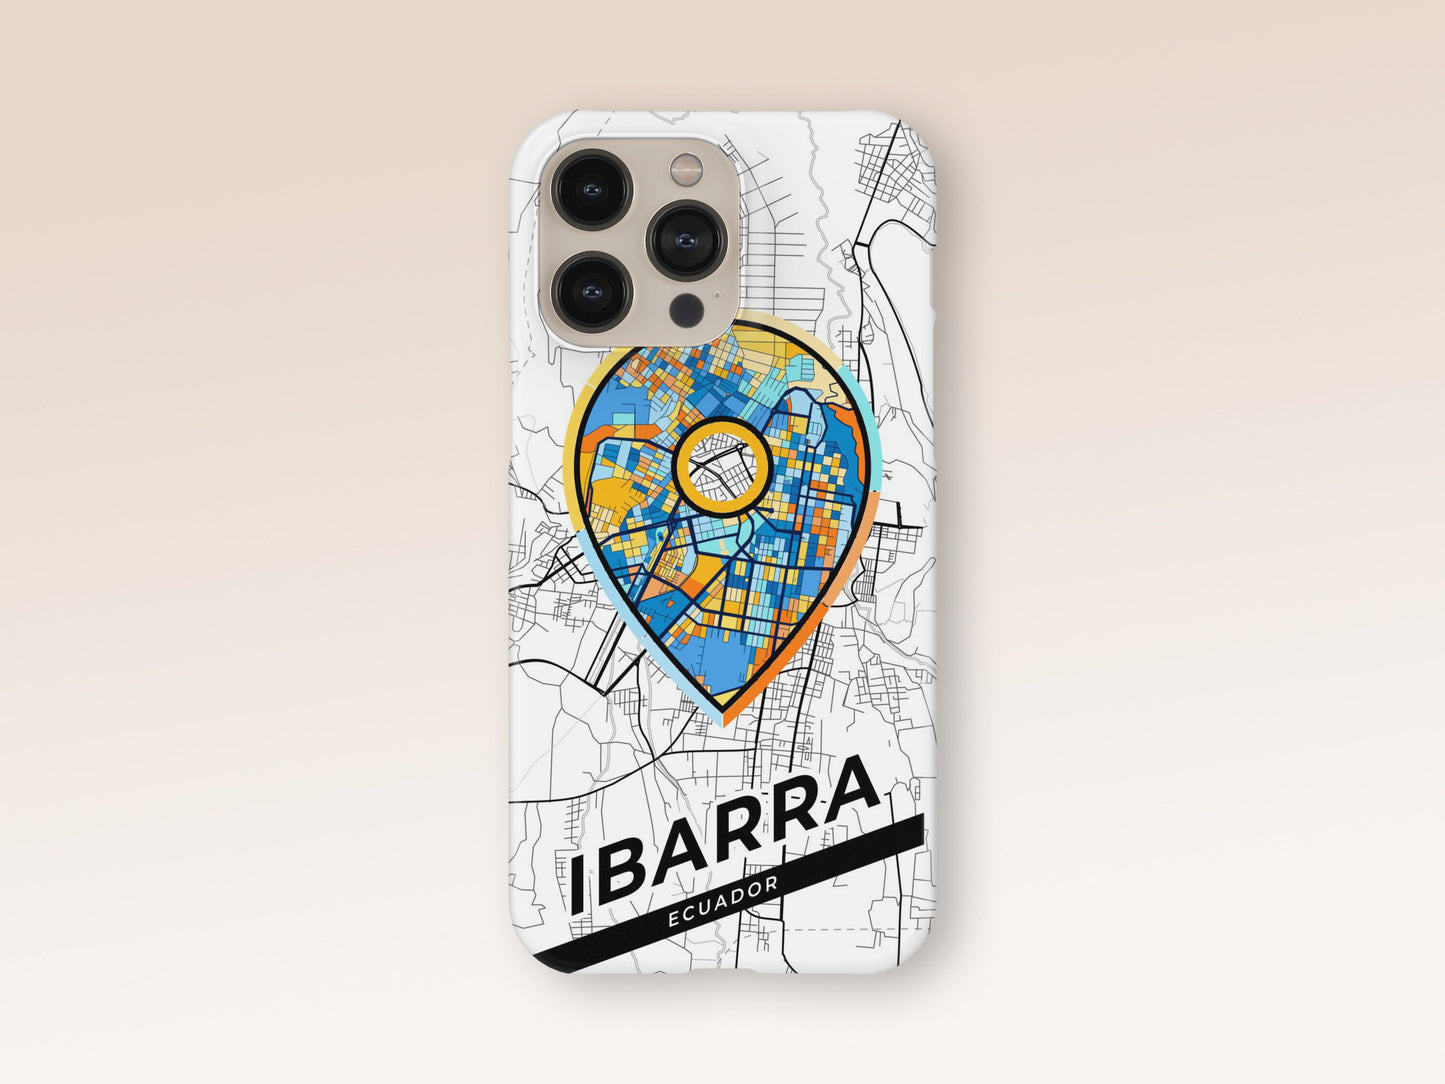 Ibarra Ecuador slim phone case with colorful icon. Birthday, wedding or housewarming gift. Couple match cases. 1